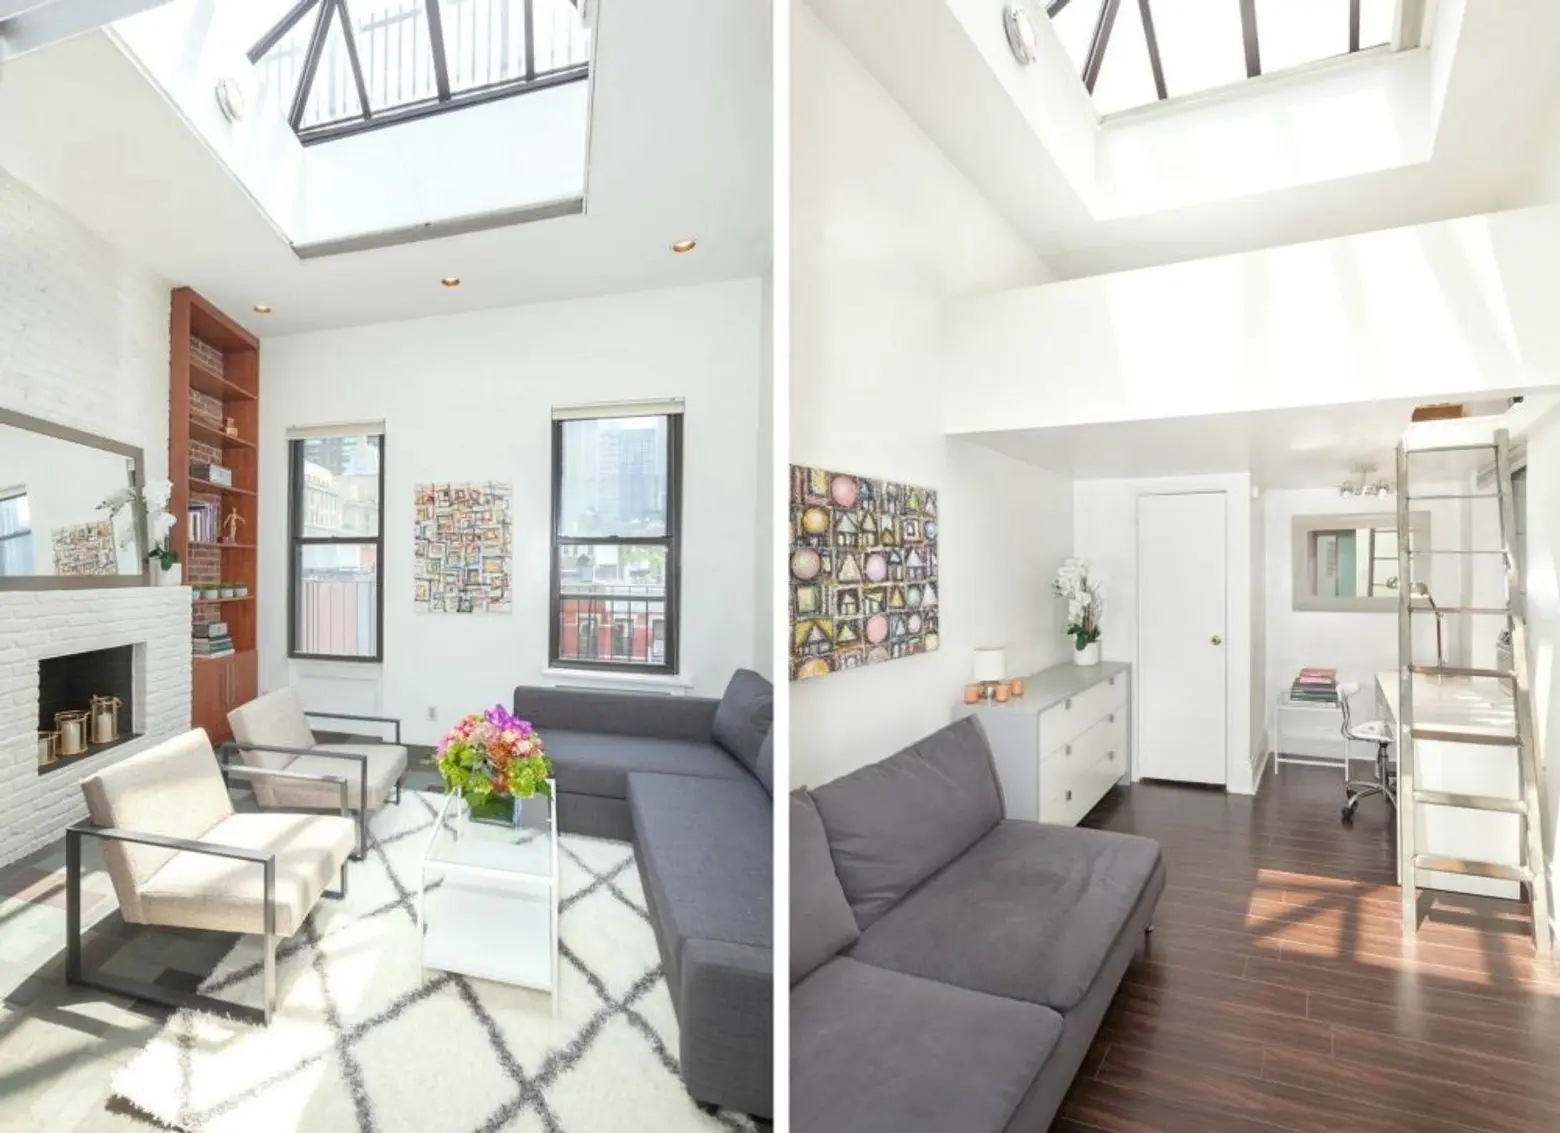 ‘Apartment in the sky’ with lofts and skylights asks $625K in Hell’s Kitchen